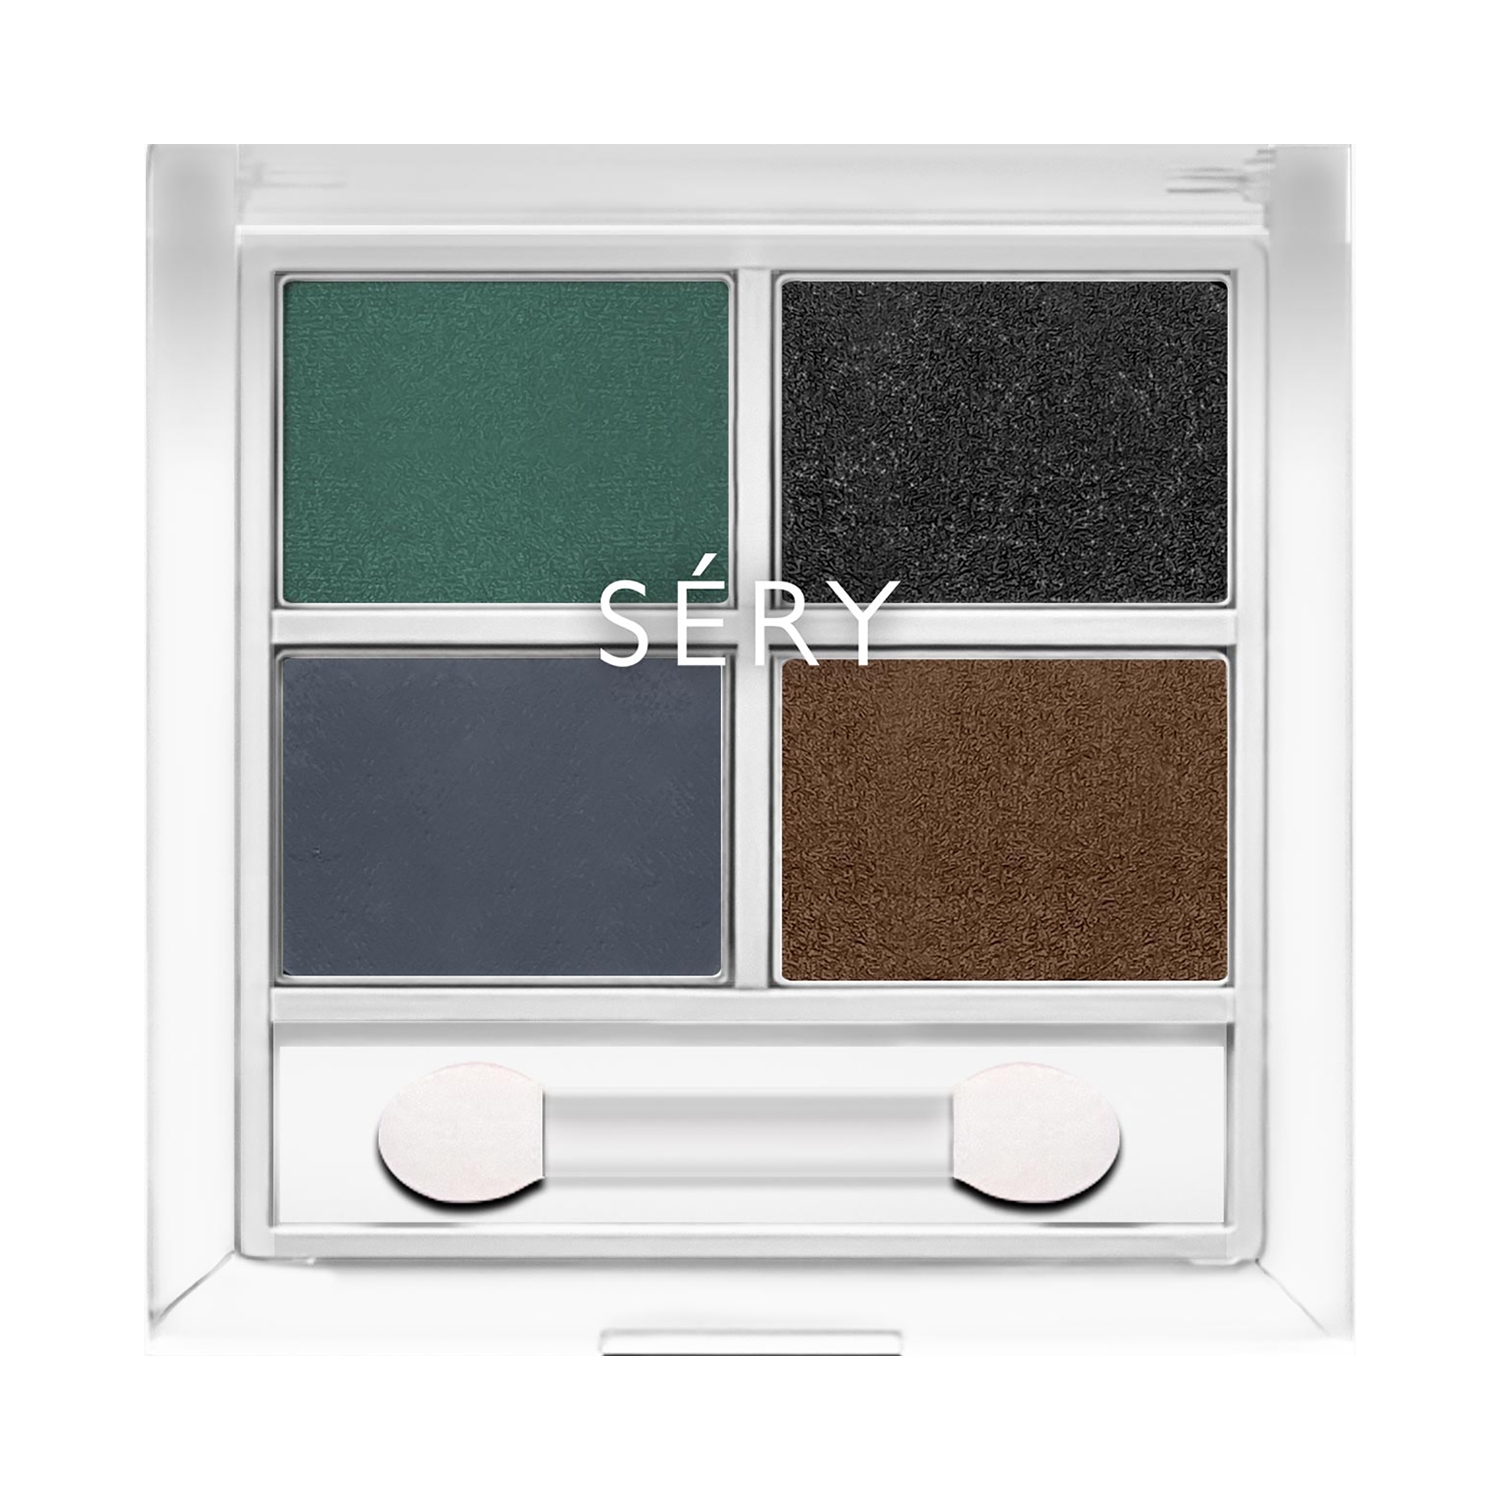 Sery | Sery Day To Night Eye Shadow Palette - Take Me Out (7.2g)